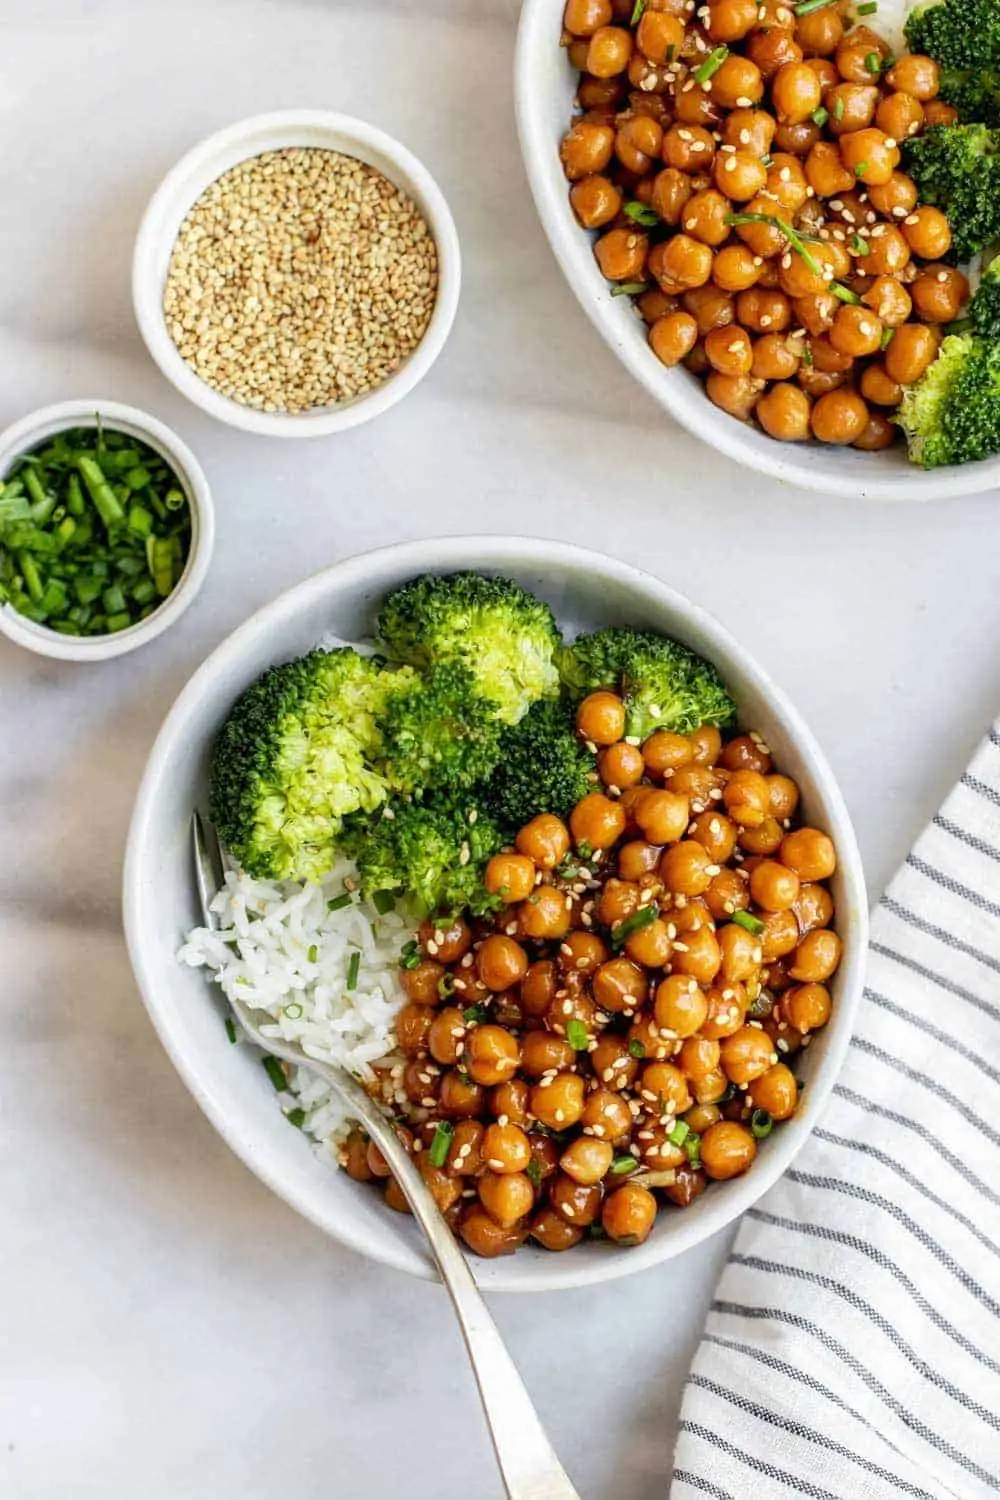 Sticky sesame chickpea recipe with rice and broccoli in a small bowl.